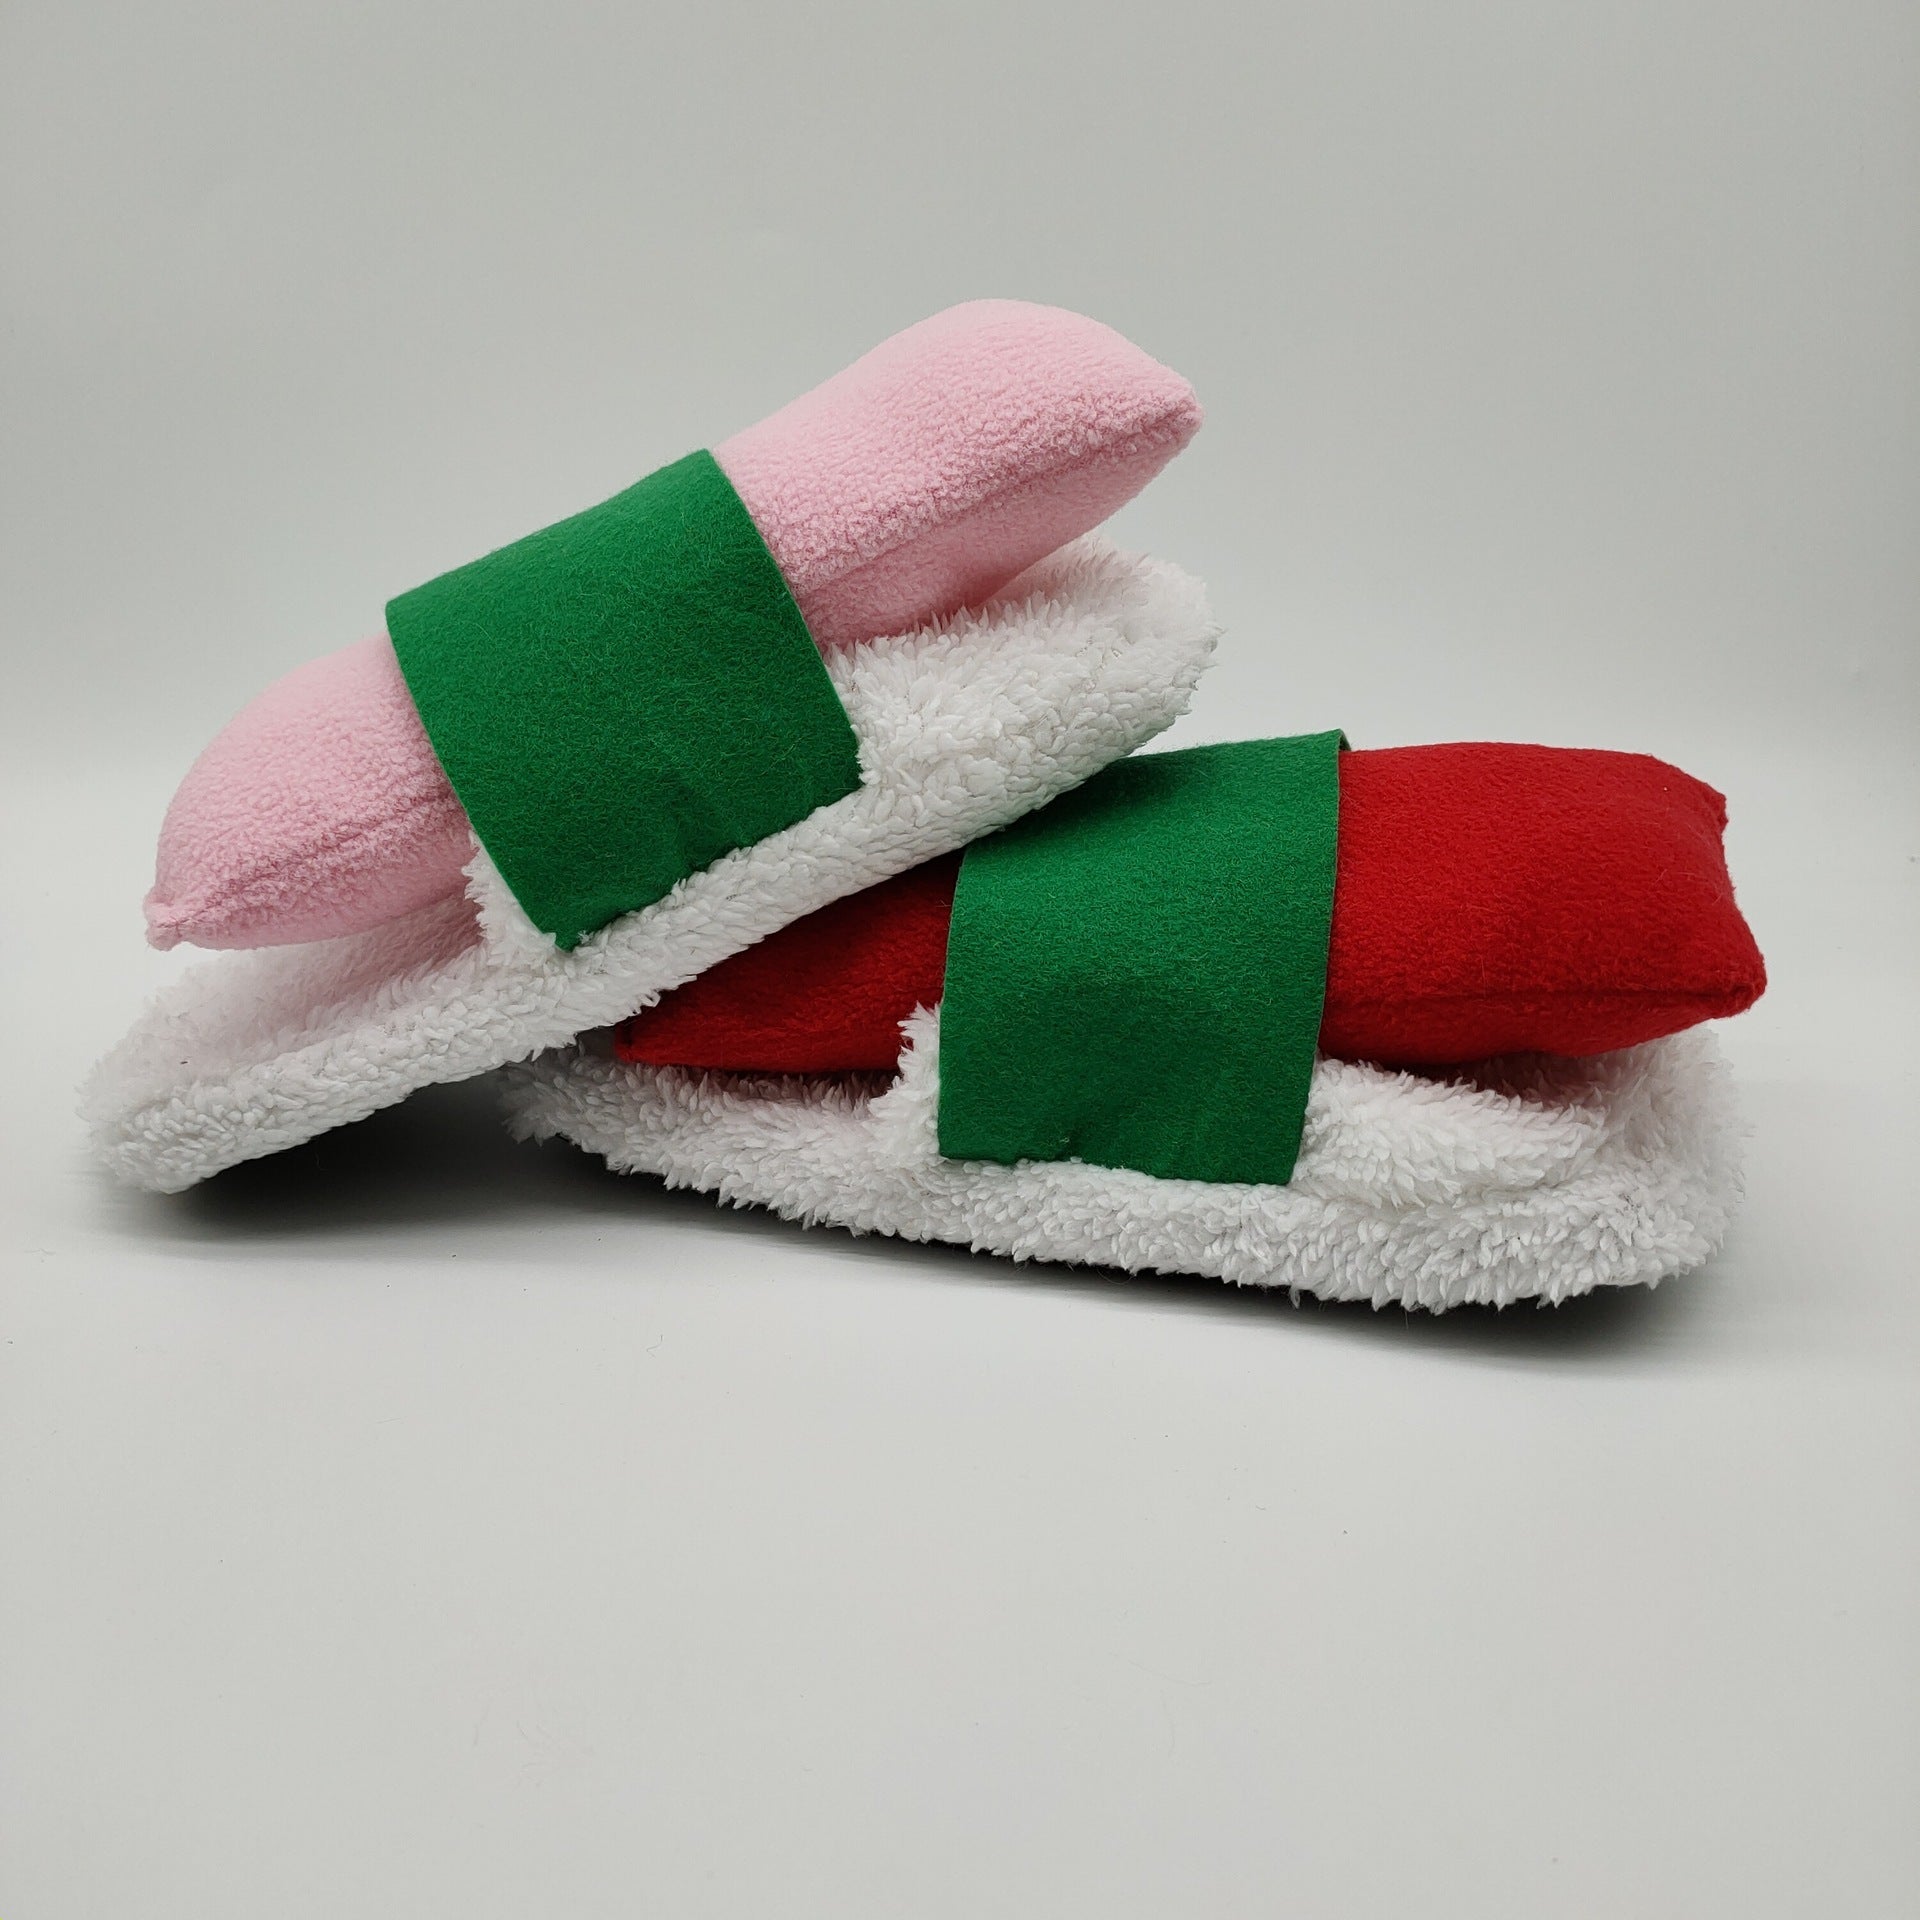 Sushi Simulation Slippers Spoof Tintin Slippers Slippers Thicken Home Cotton Slippers